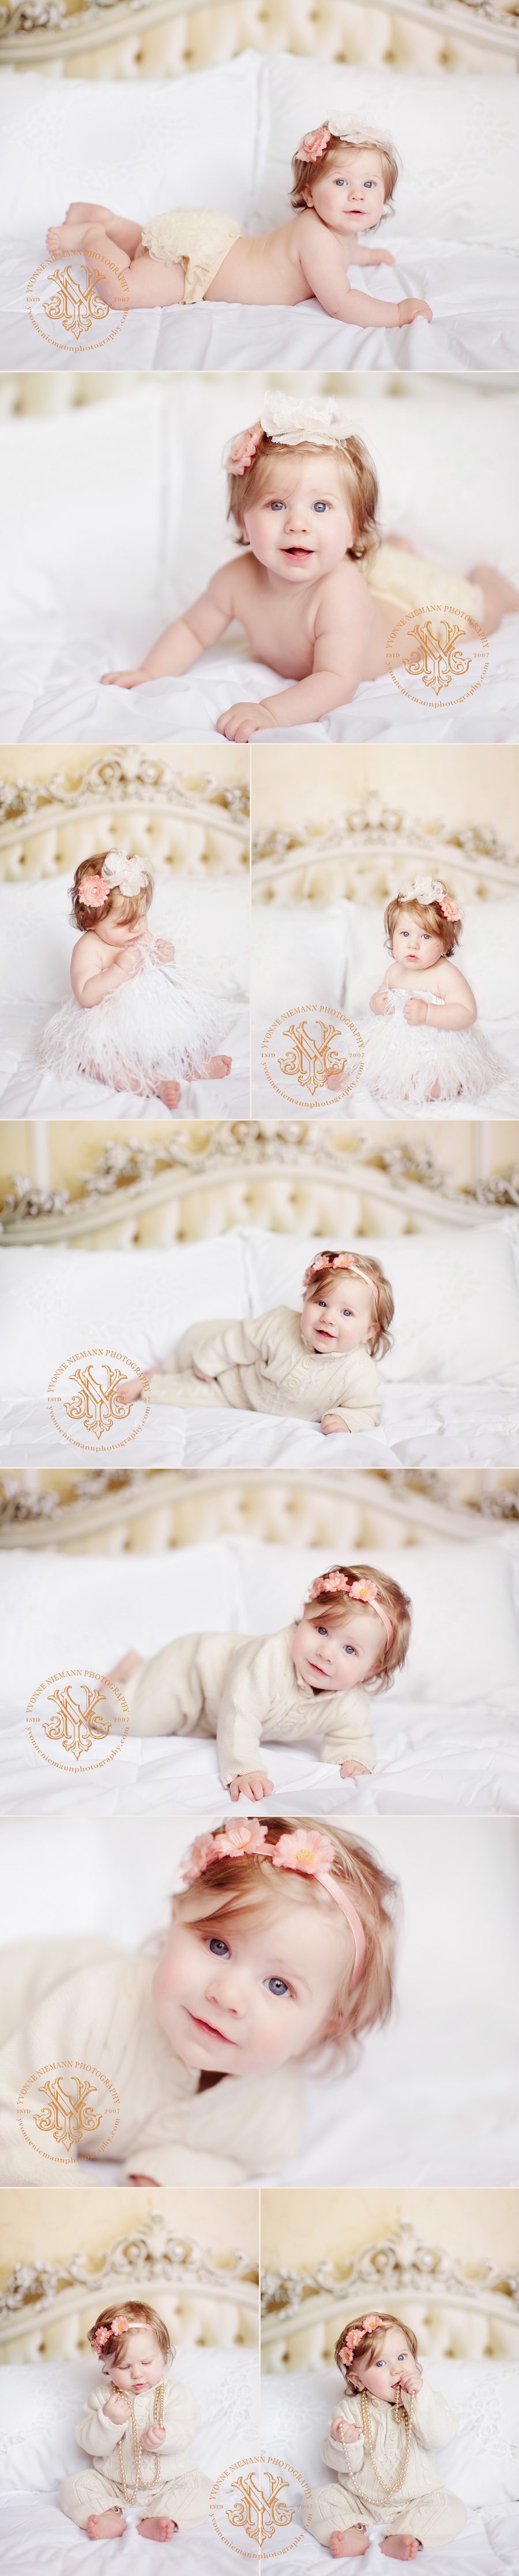 Portraits of a six month old baby girl on a bed of white taken by Yvonne Niemann Photography on location in St. Louis.